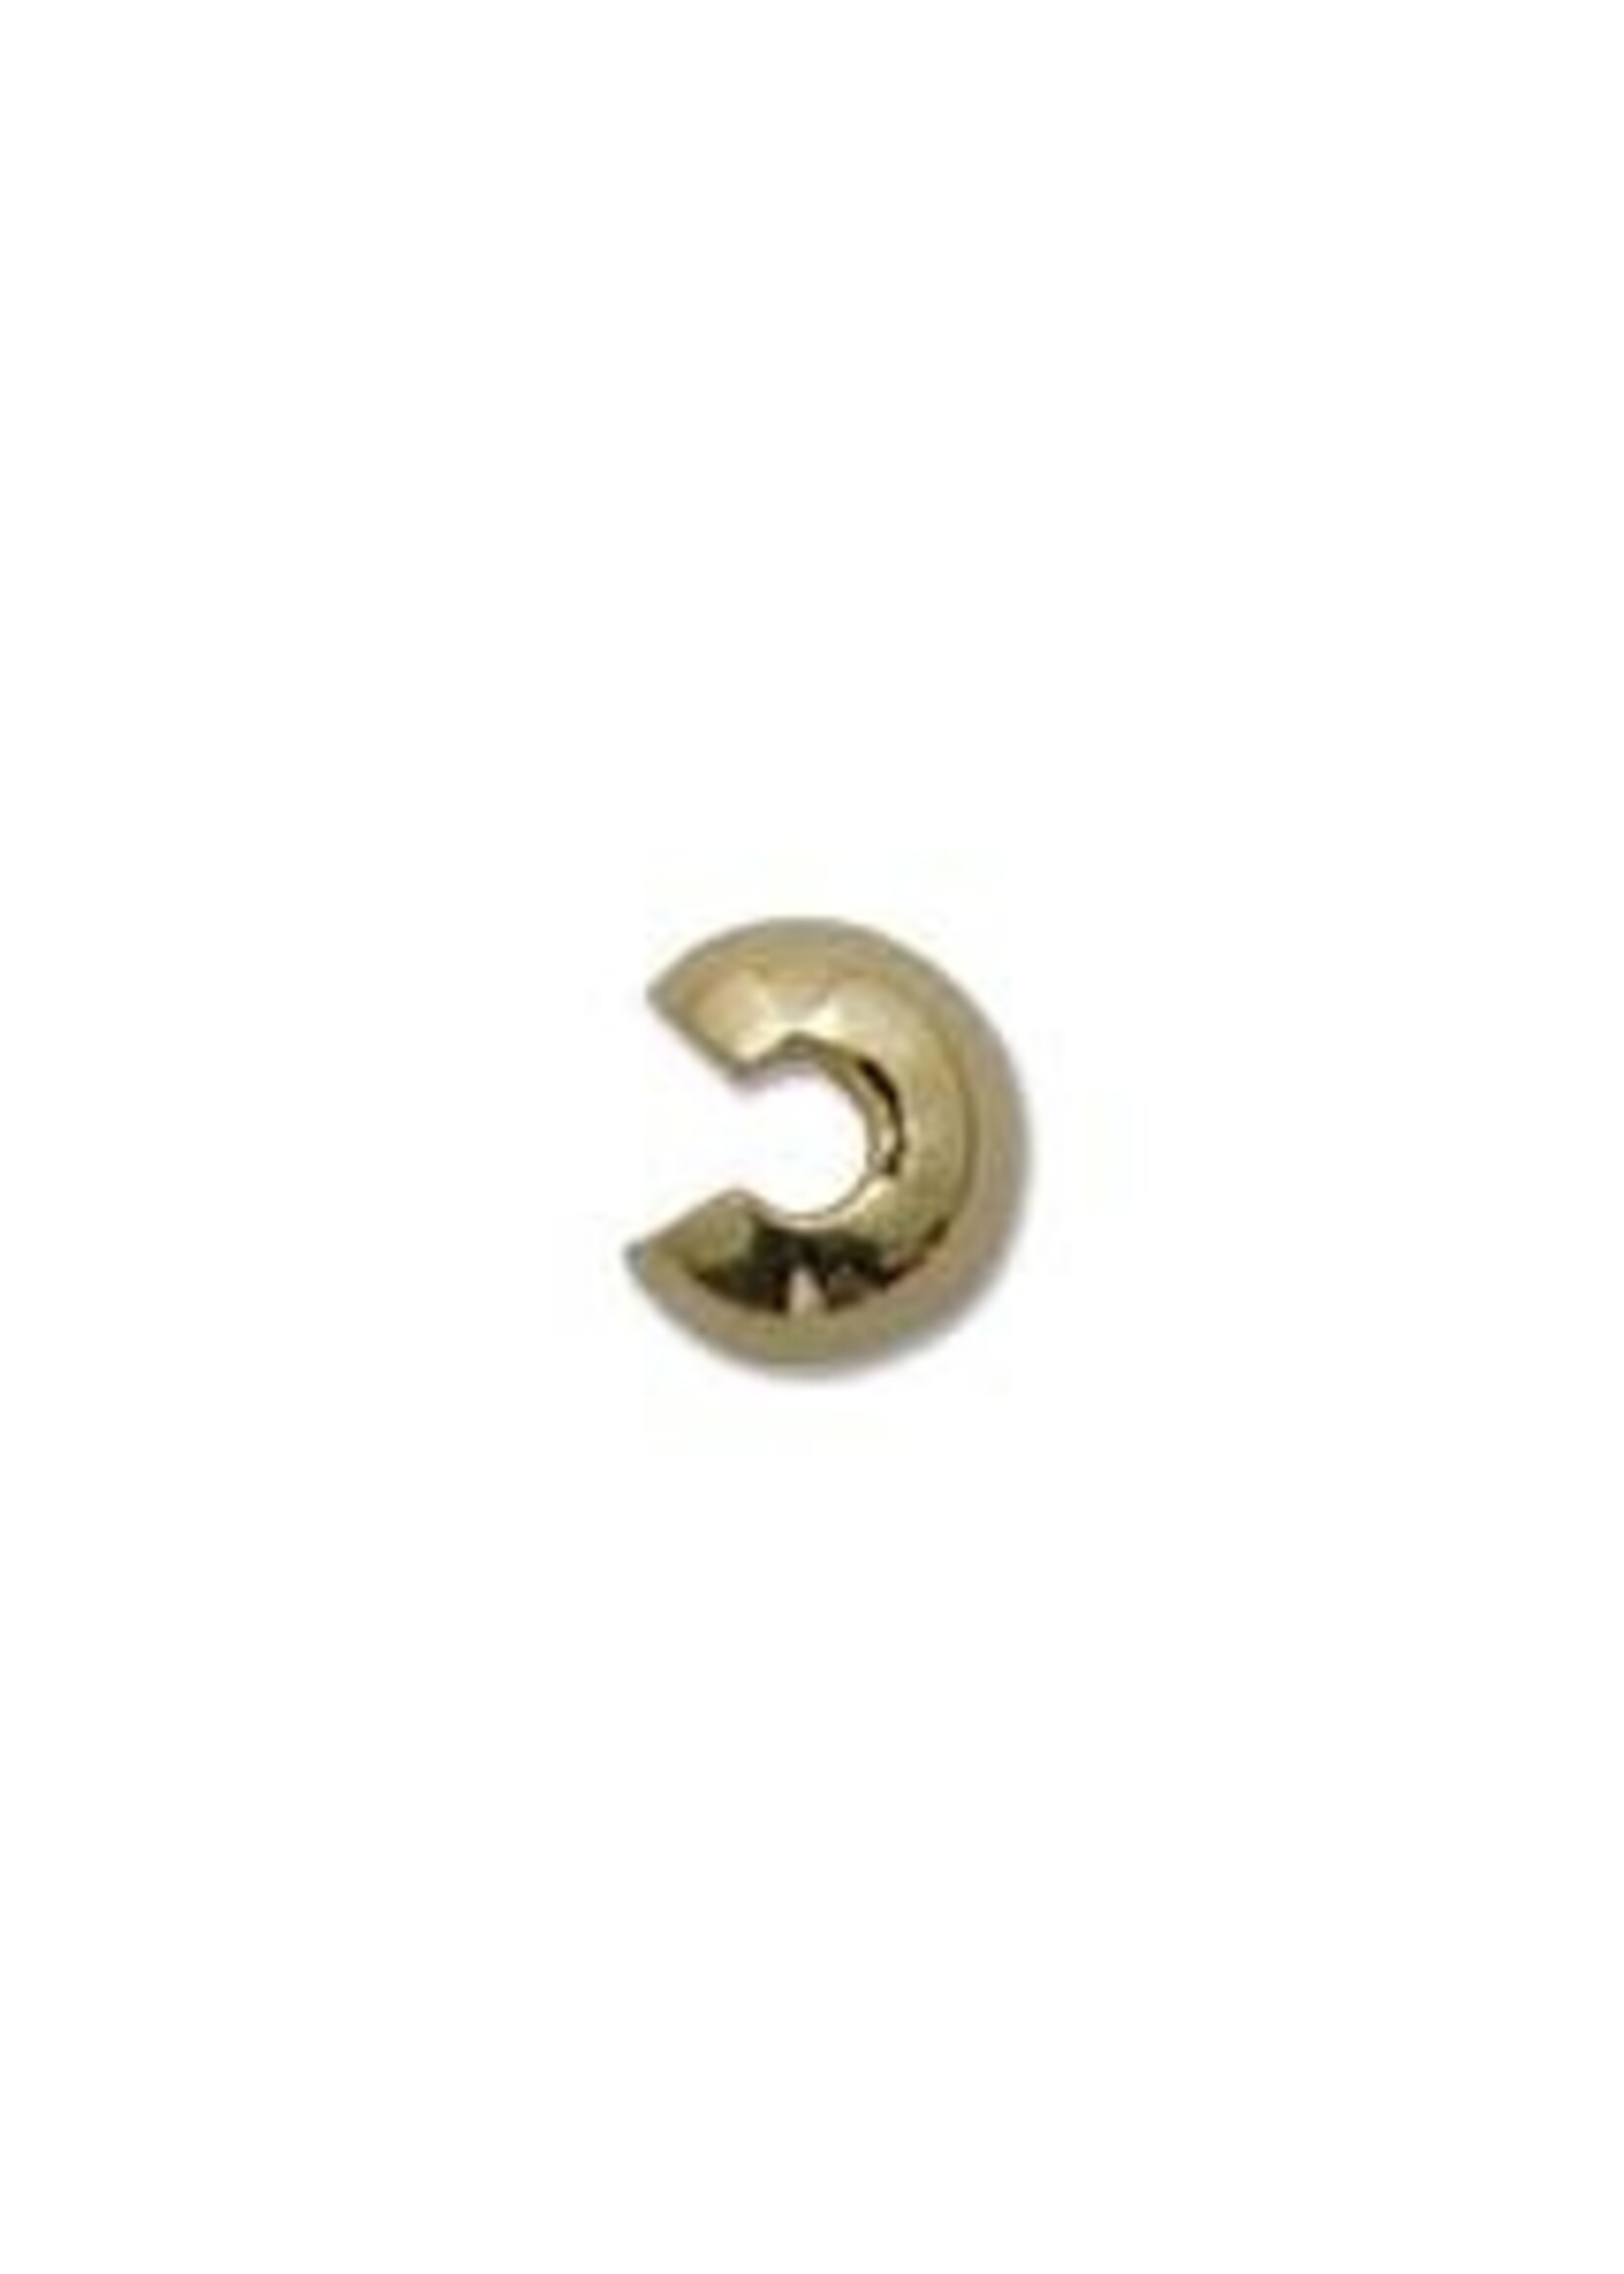 4mm Crimp Cover Gold Plate Qty 144